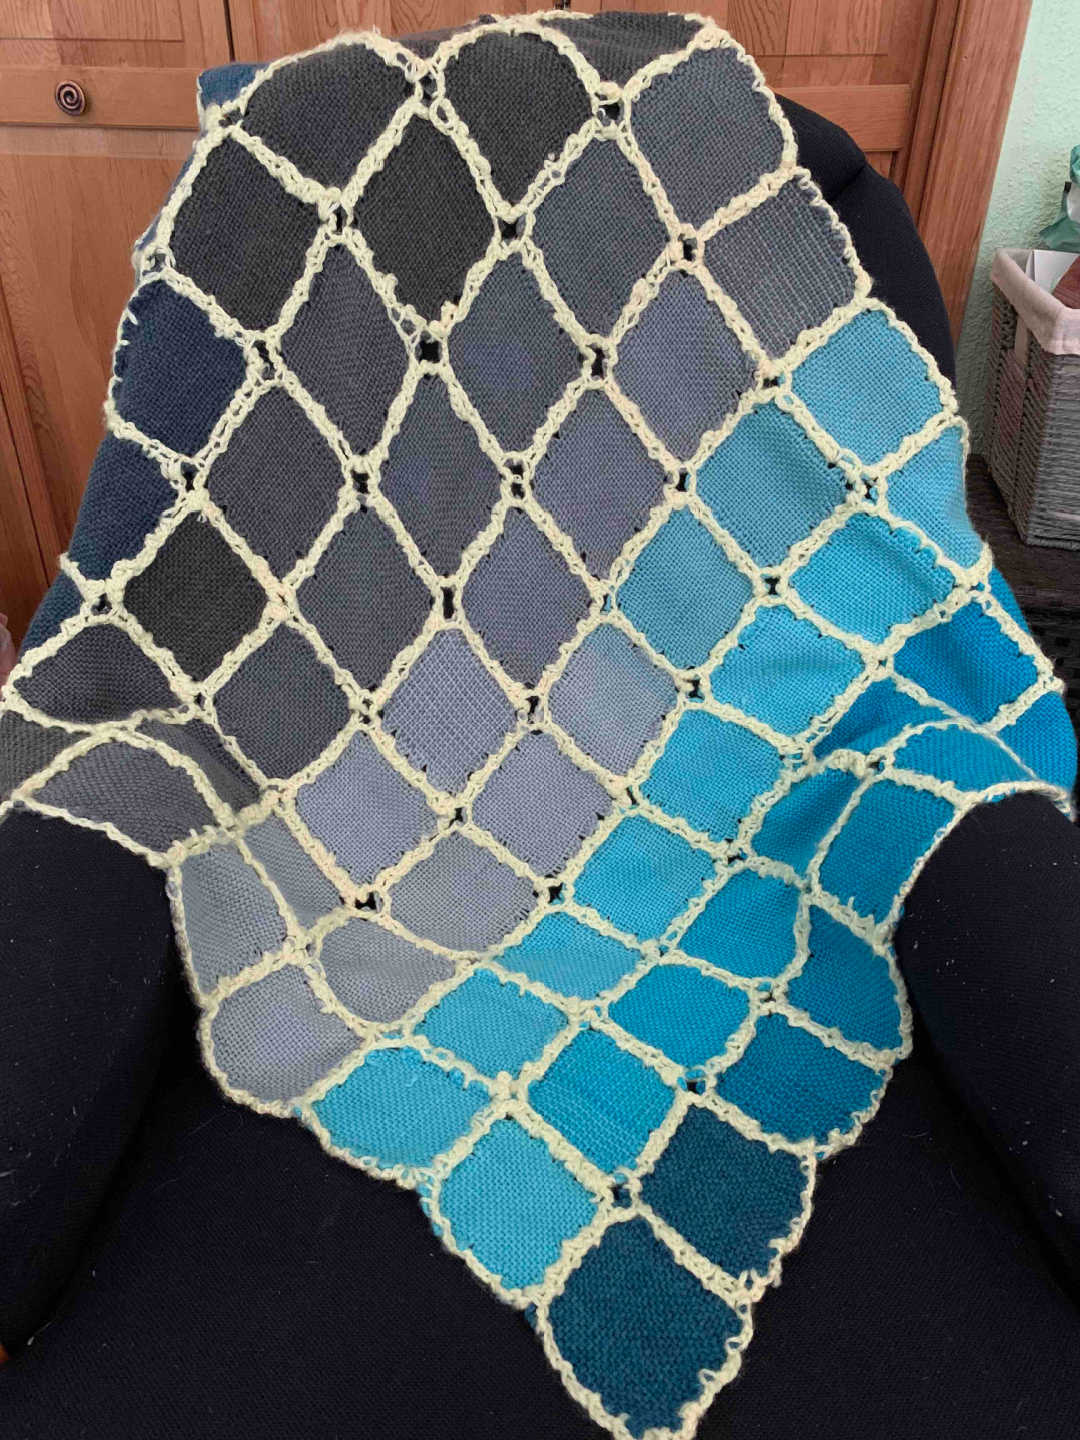 Finished Baby Blanket